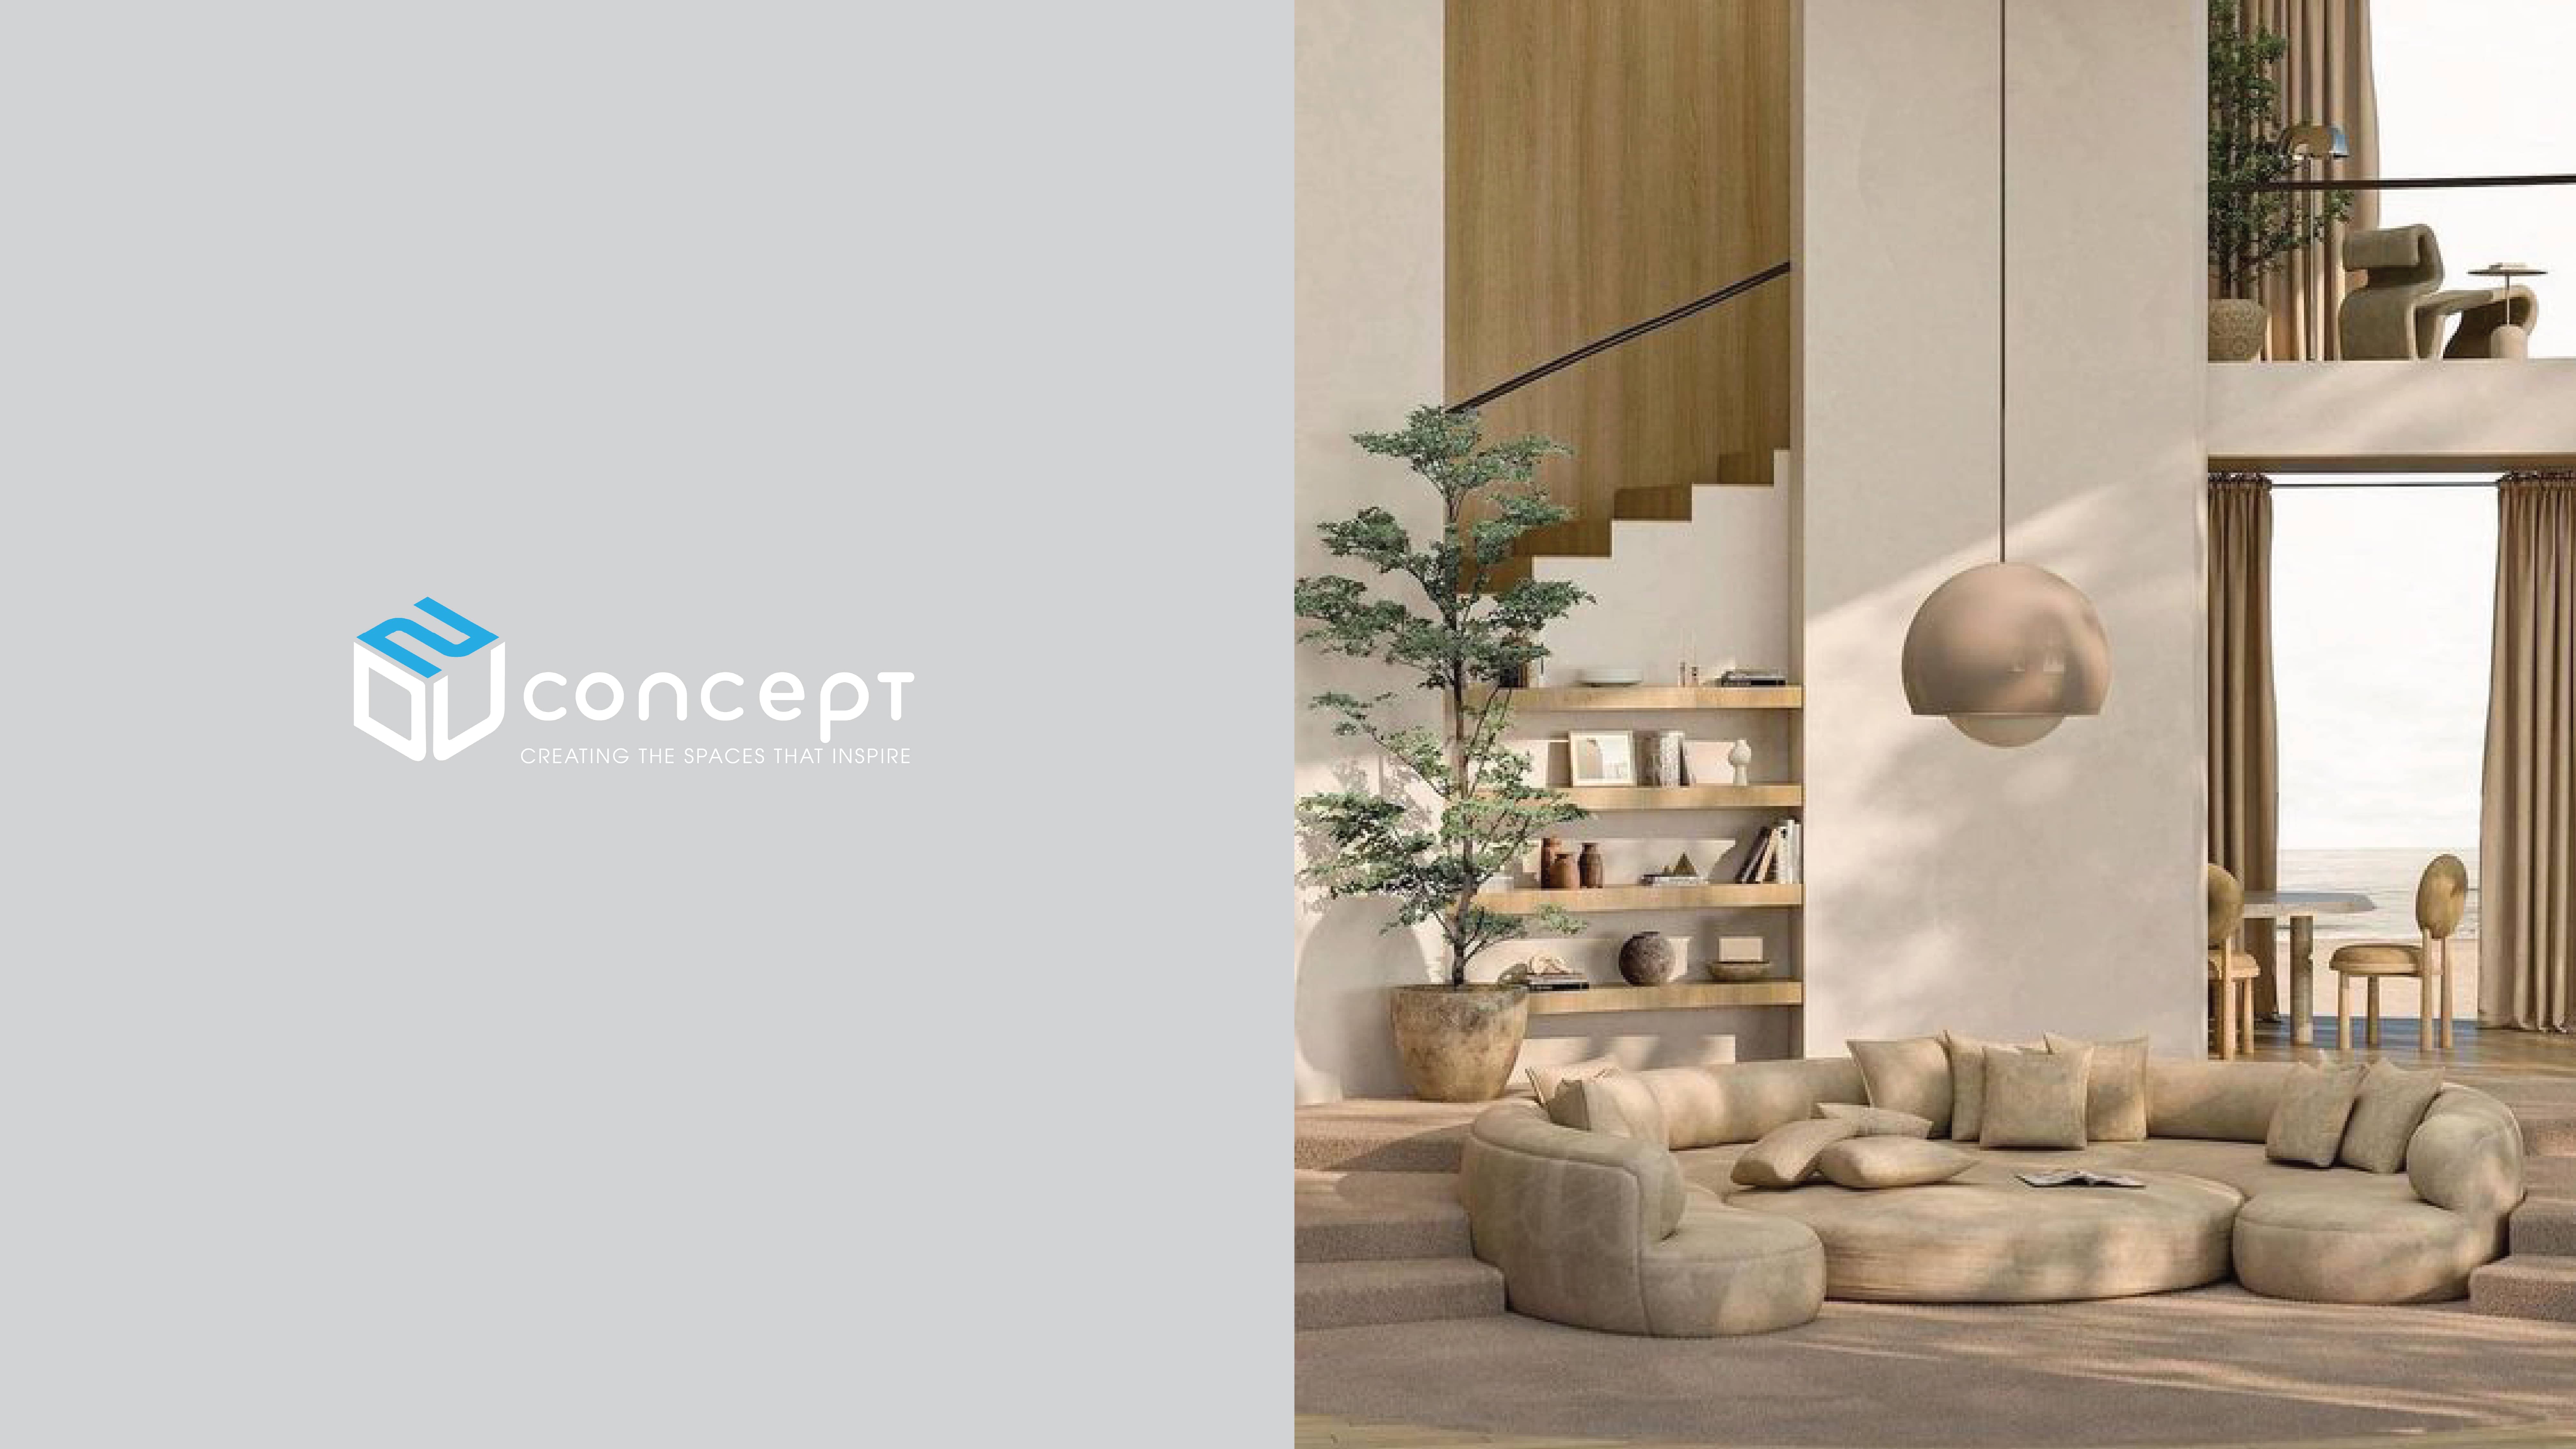 DNU CONCEPT - Creating spaces that inspire